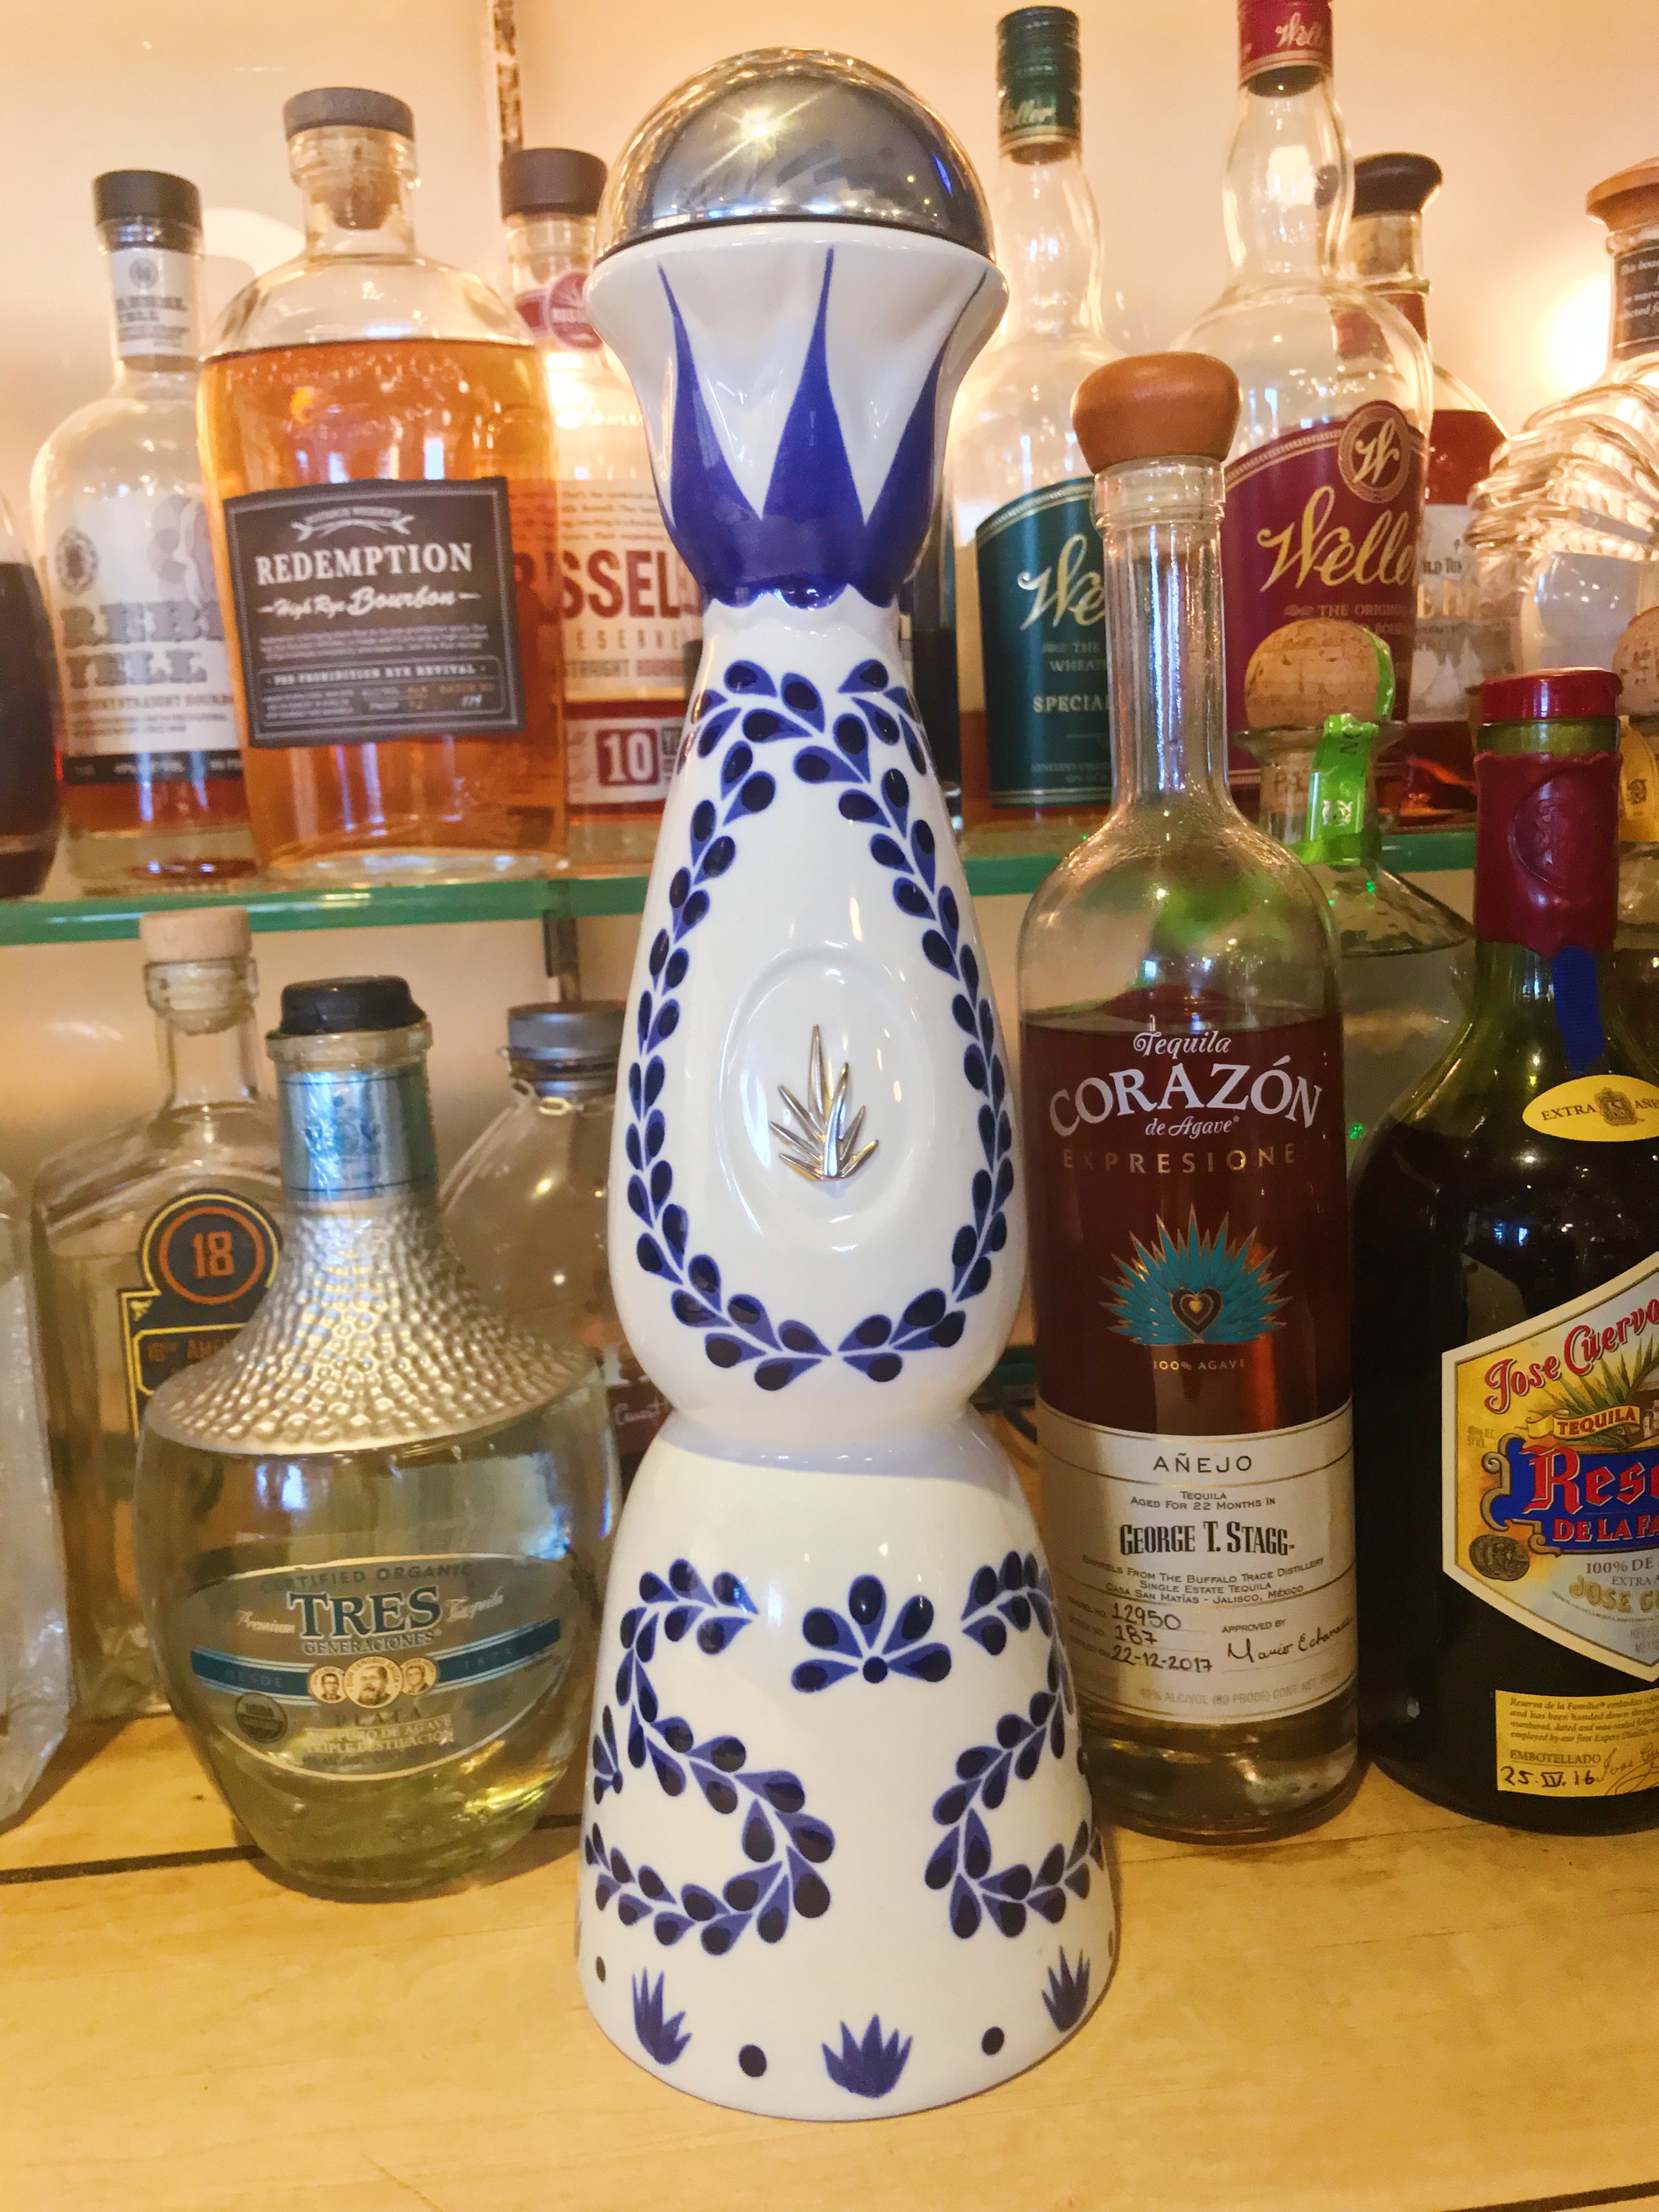 A bottle of Clase Azul tequila on the Roadhouse bar.